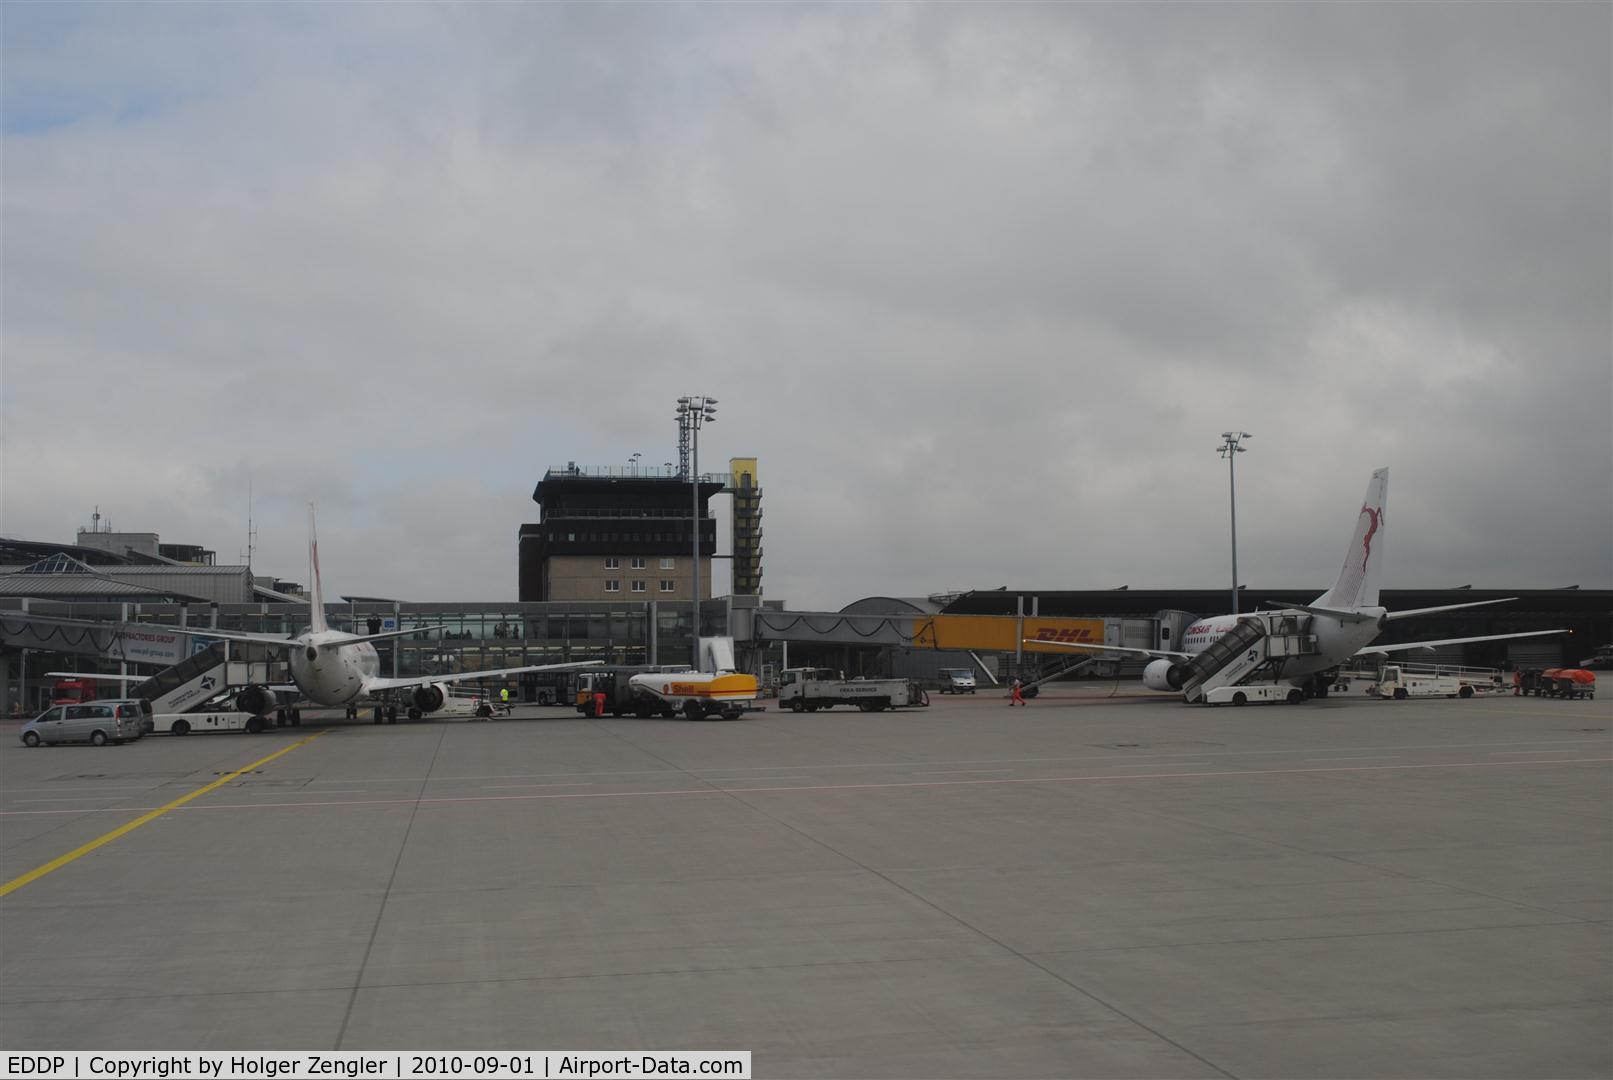 Leipzig/Halle Airport, Leipzig/Halle Germany (EDDP) - Normally I stay on the old tower looking at the airplanes on apron